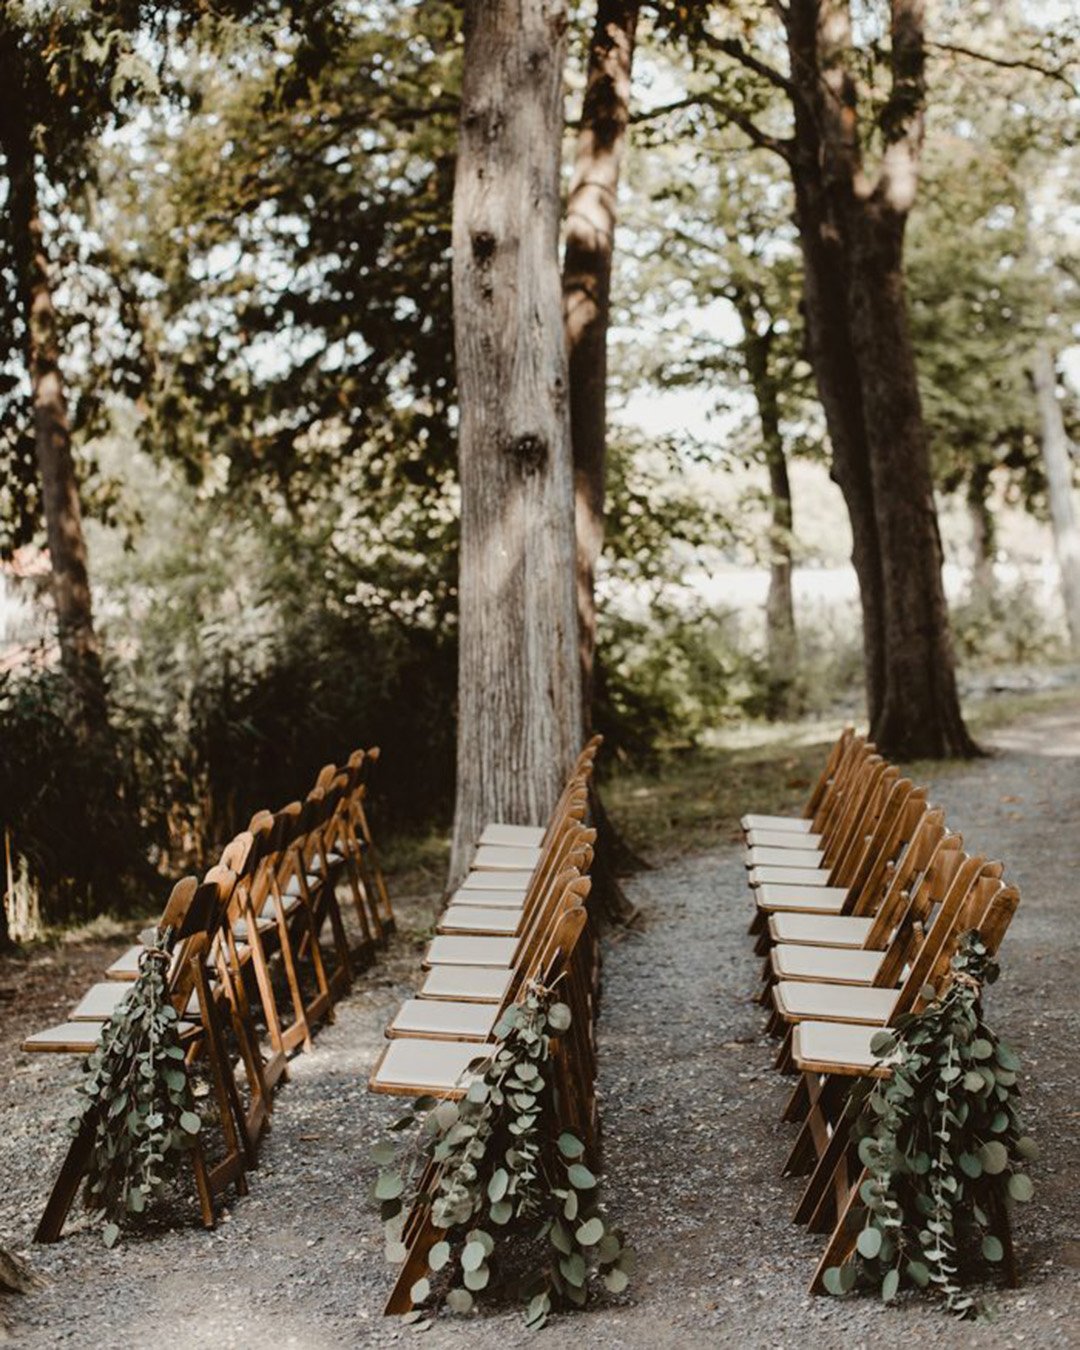 micro wedding venues ceremony chairs with greenery in park hazel eyes